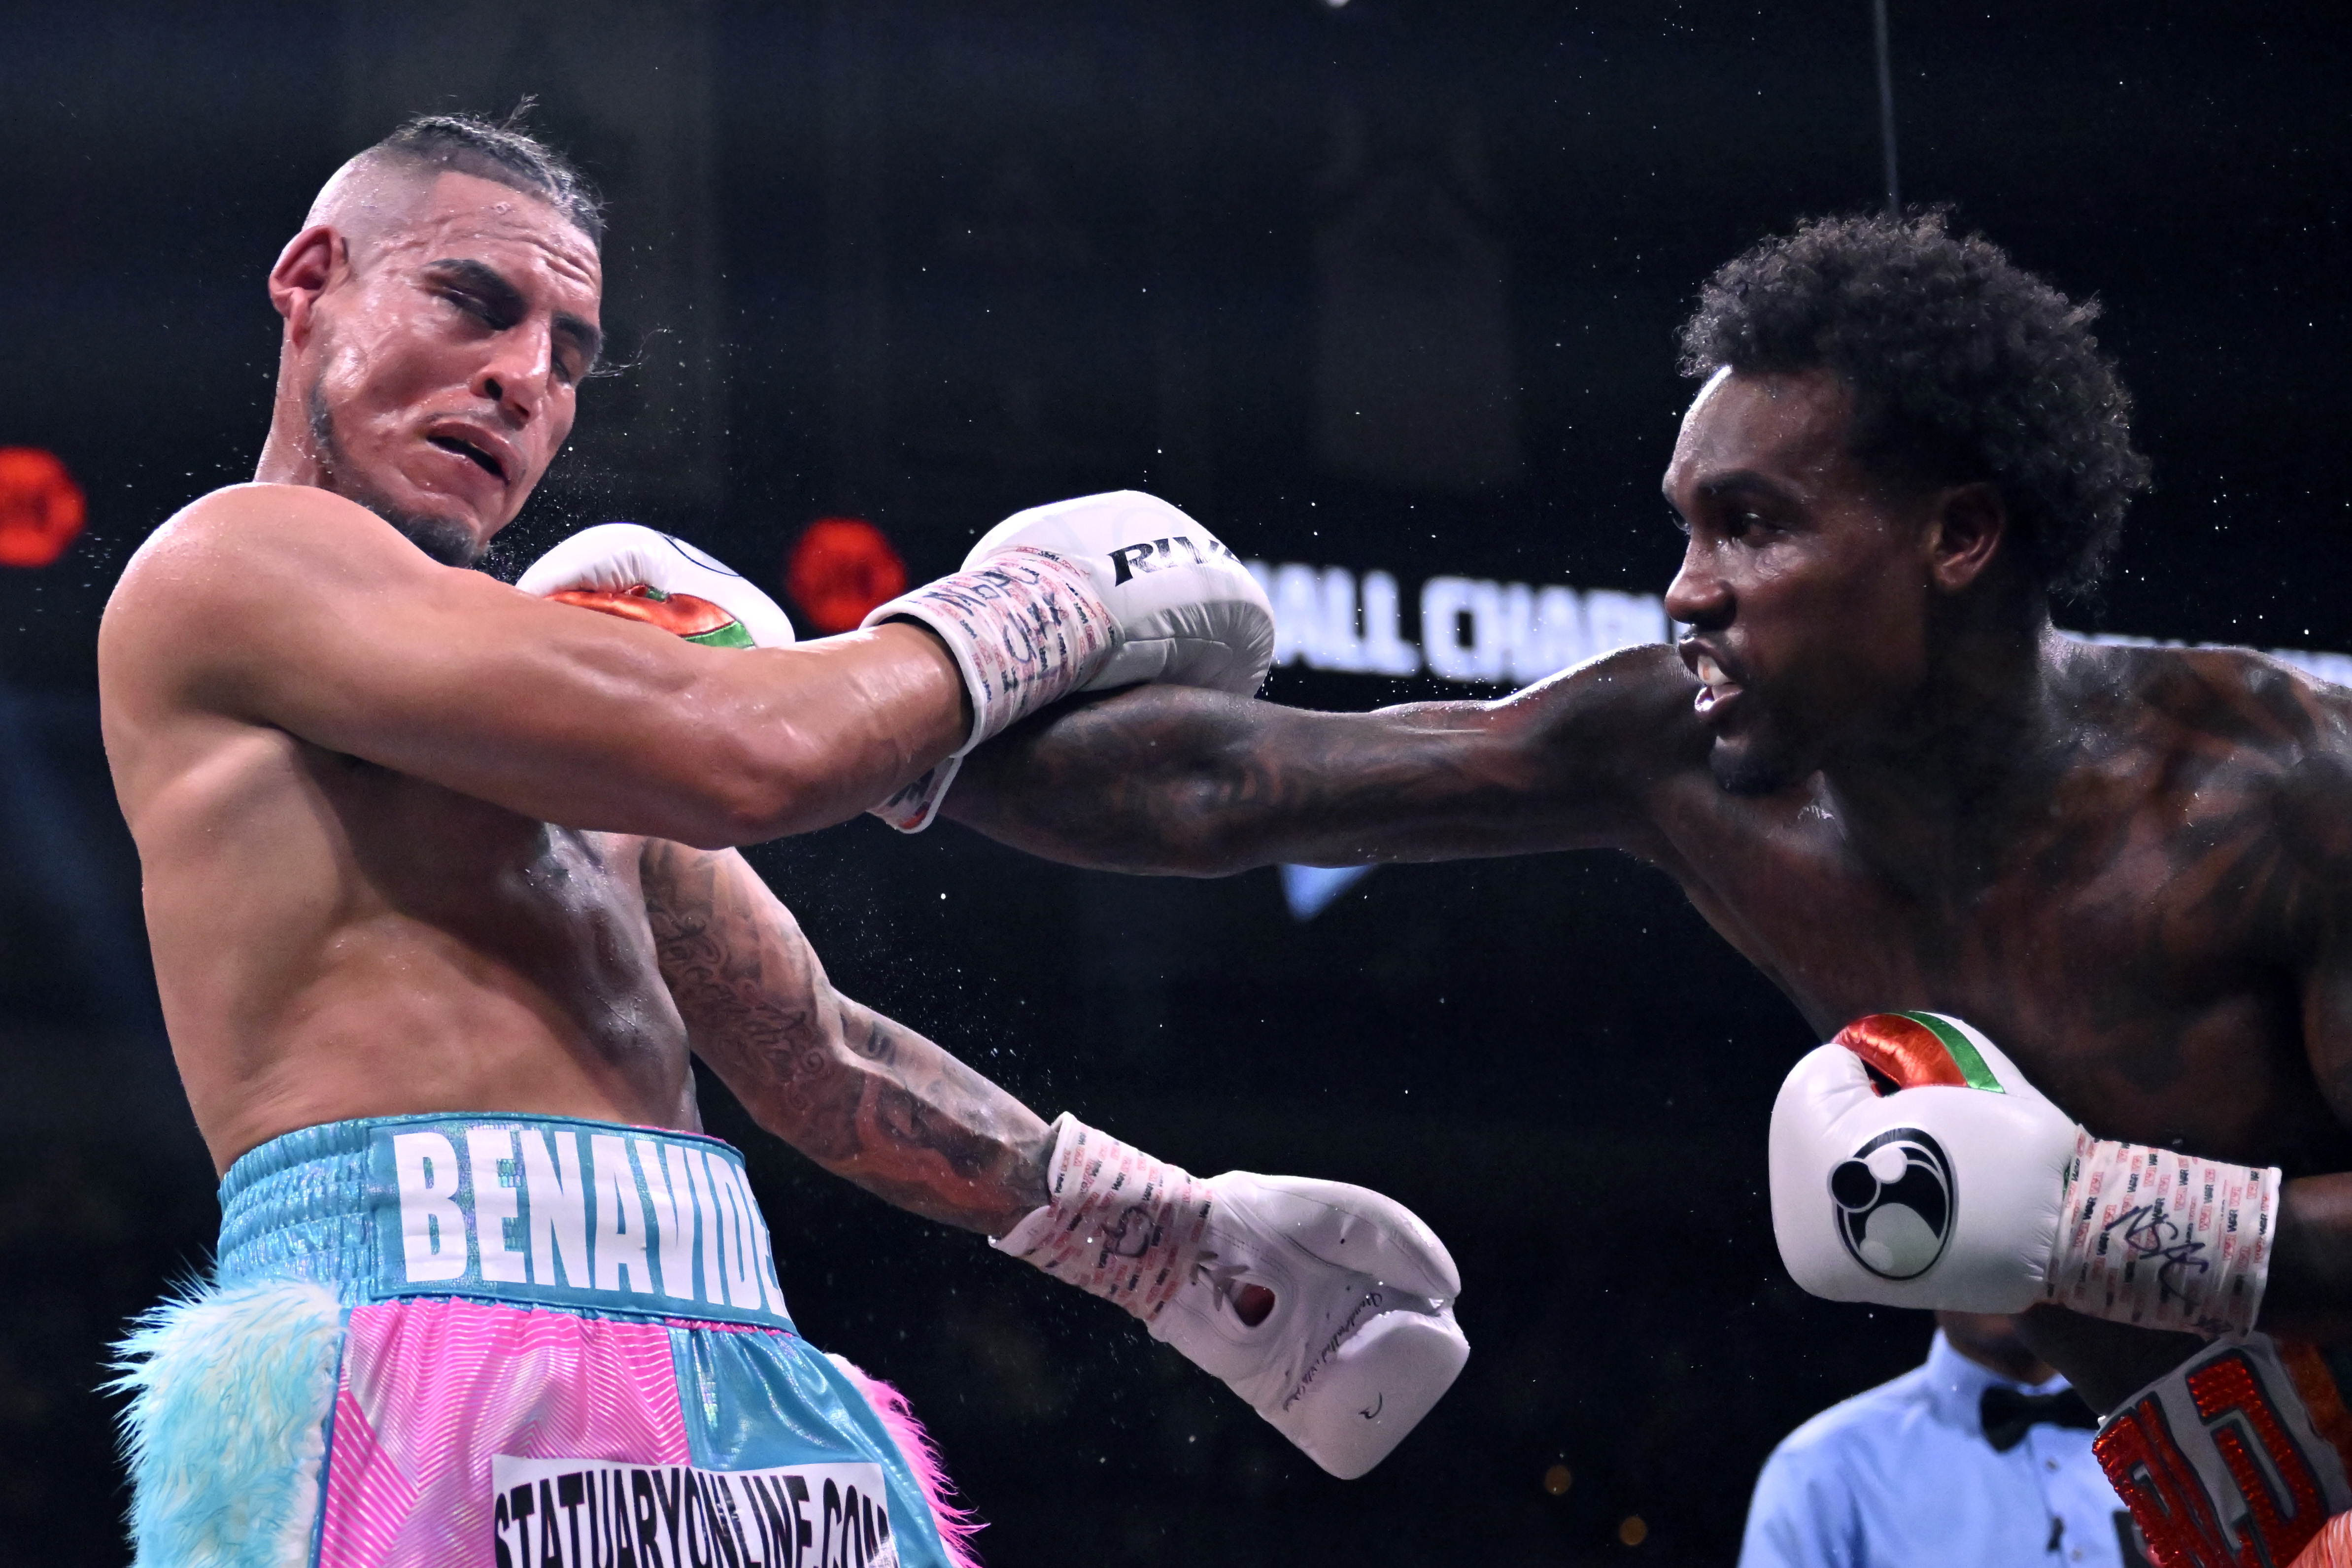 Jermall Charlo says he’s ready to jump back into the deep end after shaking the rust off against Jose Benavidez Jr.